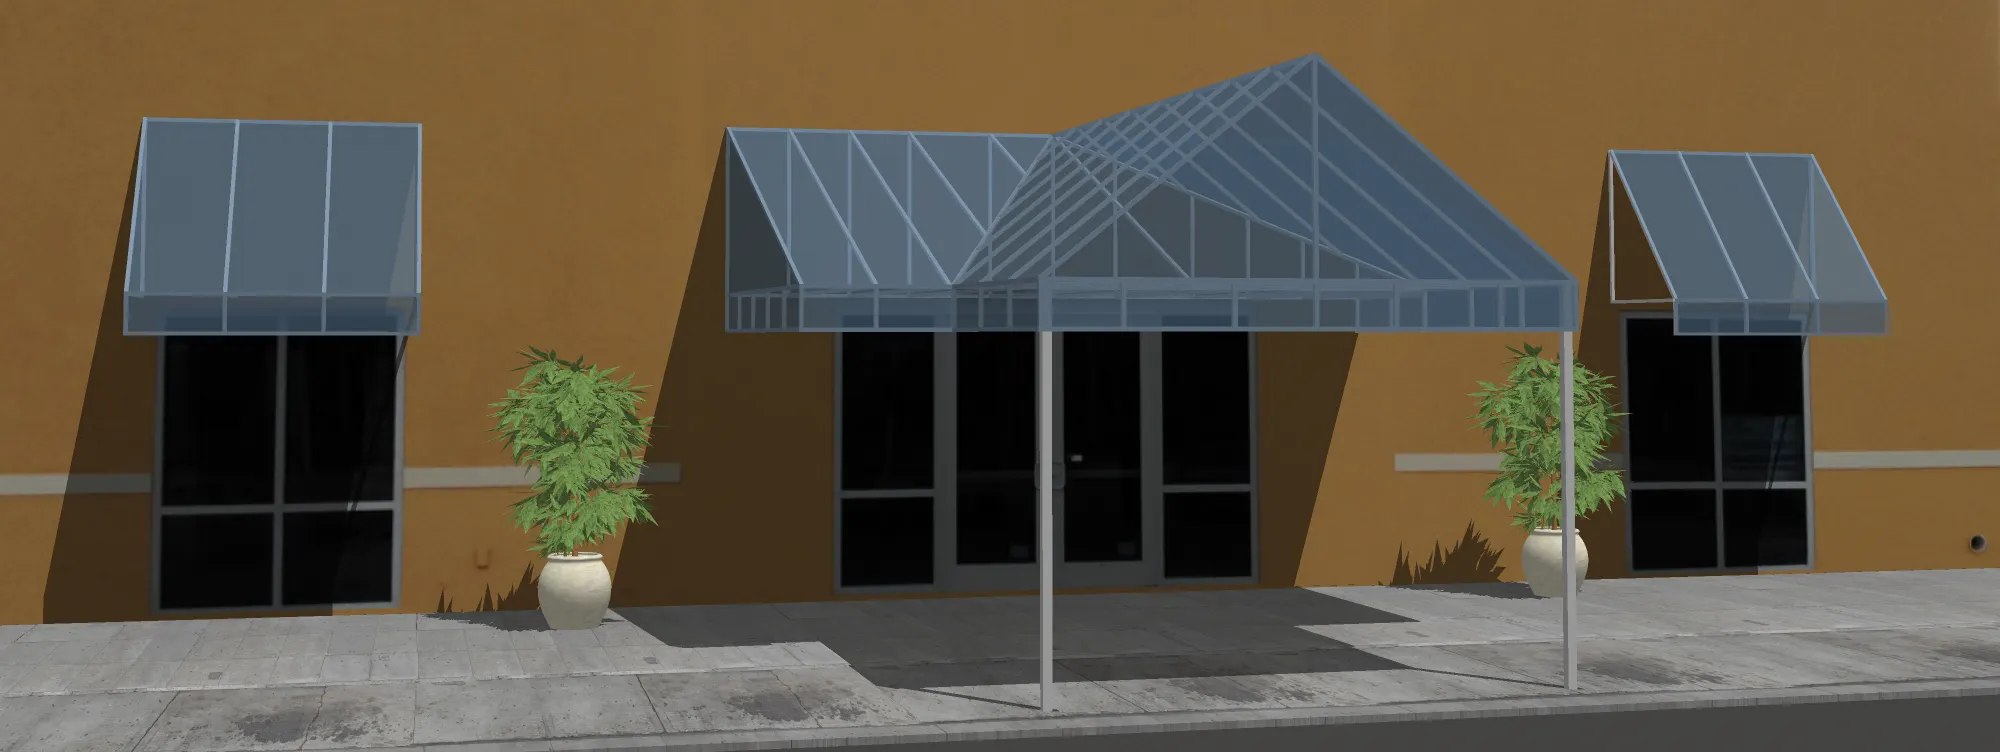 rendering of an awning on a commercial building